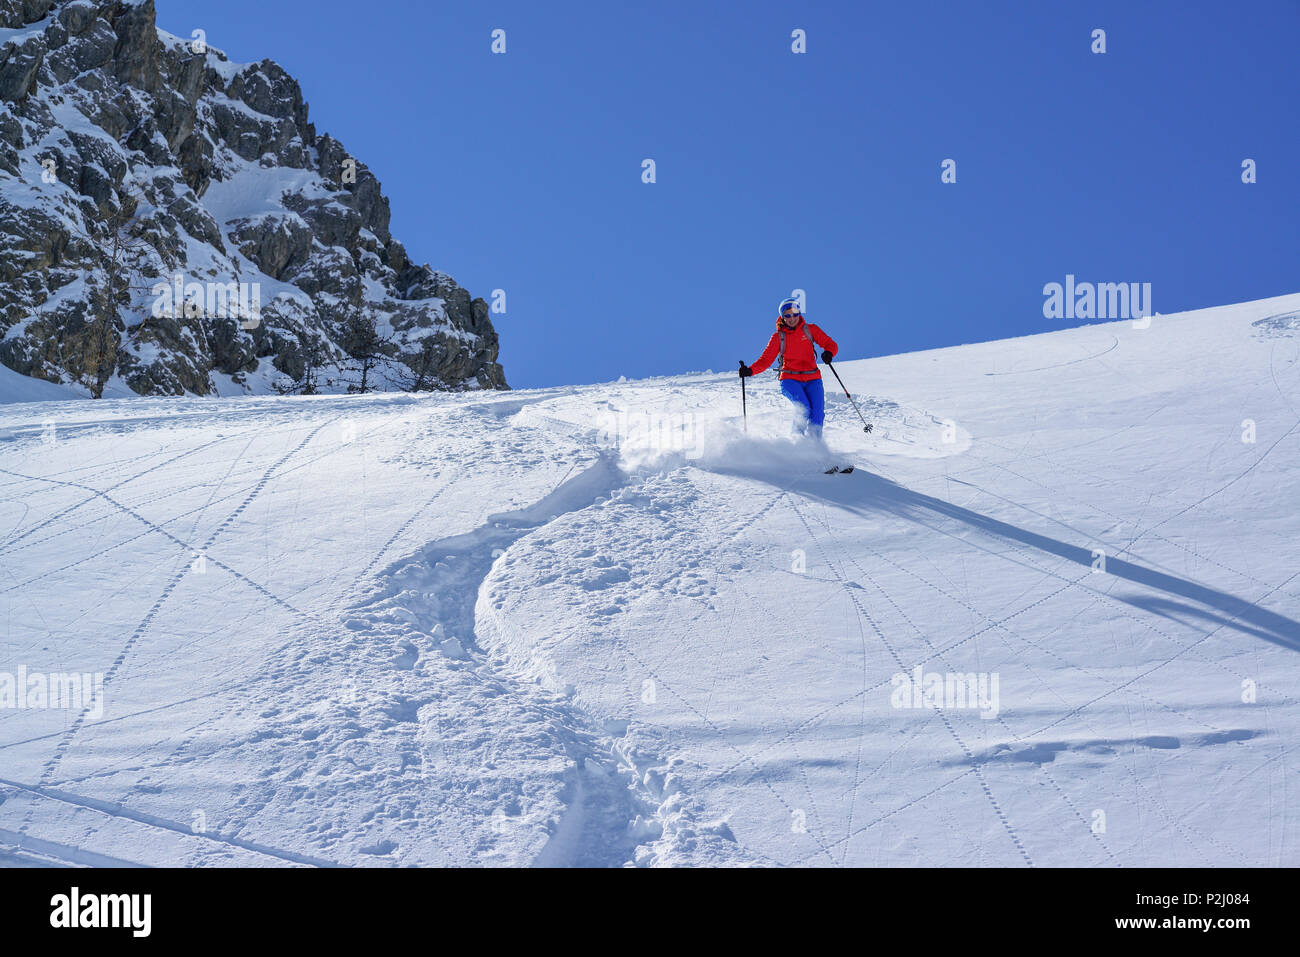 Woman back-country skiing downhill through powder snow from Passo Croce, Passo Croce, Valle Maira, Cottian Alps, Piedmont, Italy Stock Photo